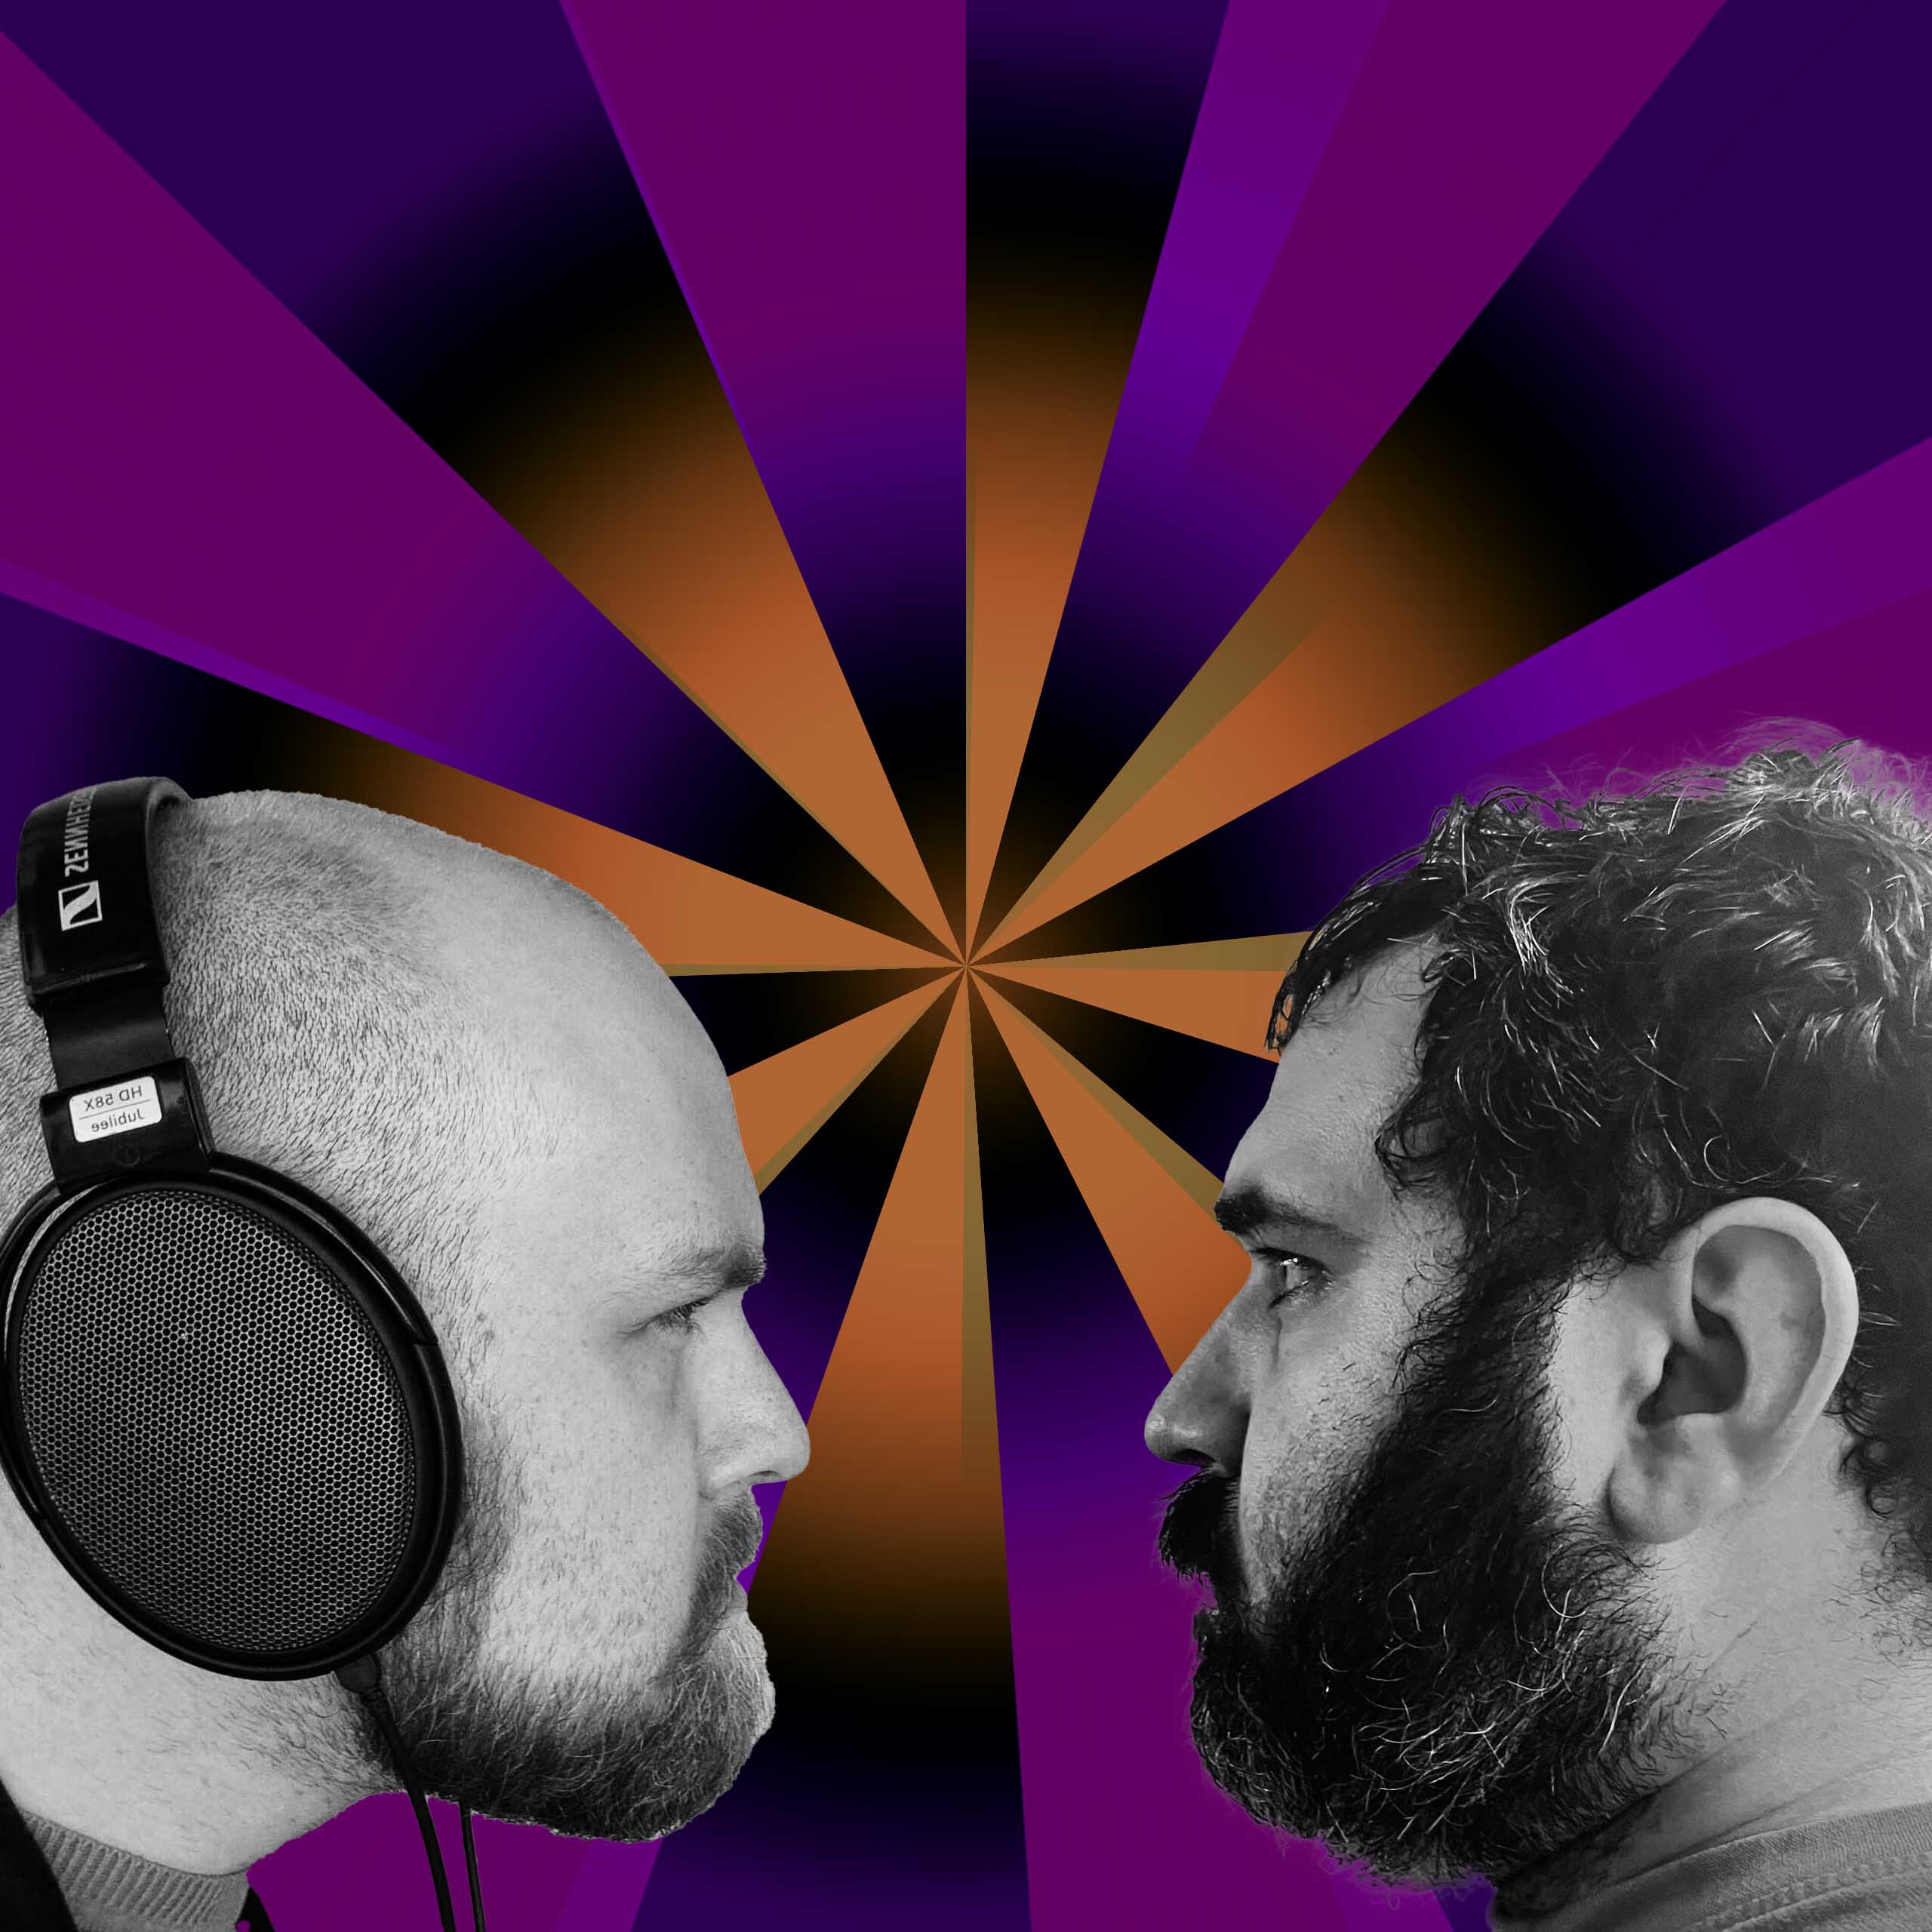 Battle of the Bears graphic featuring Jack Corfield and Mike Duddy in a staring contest.